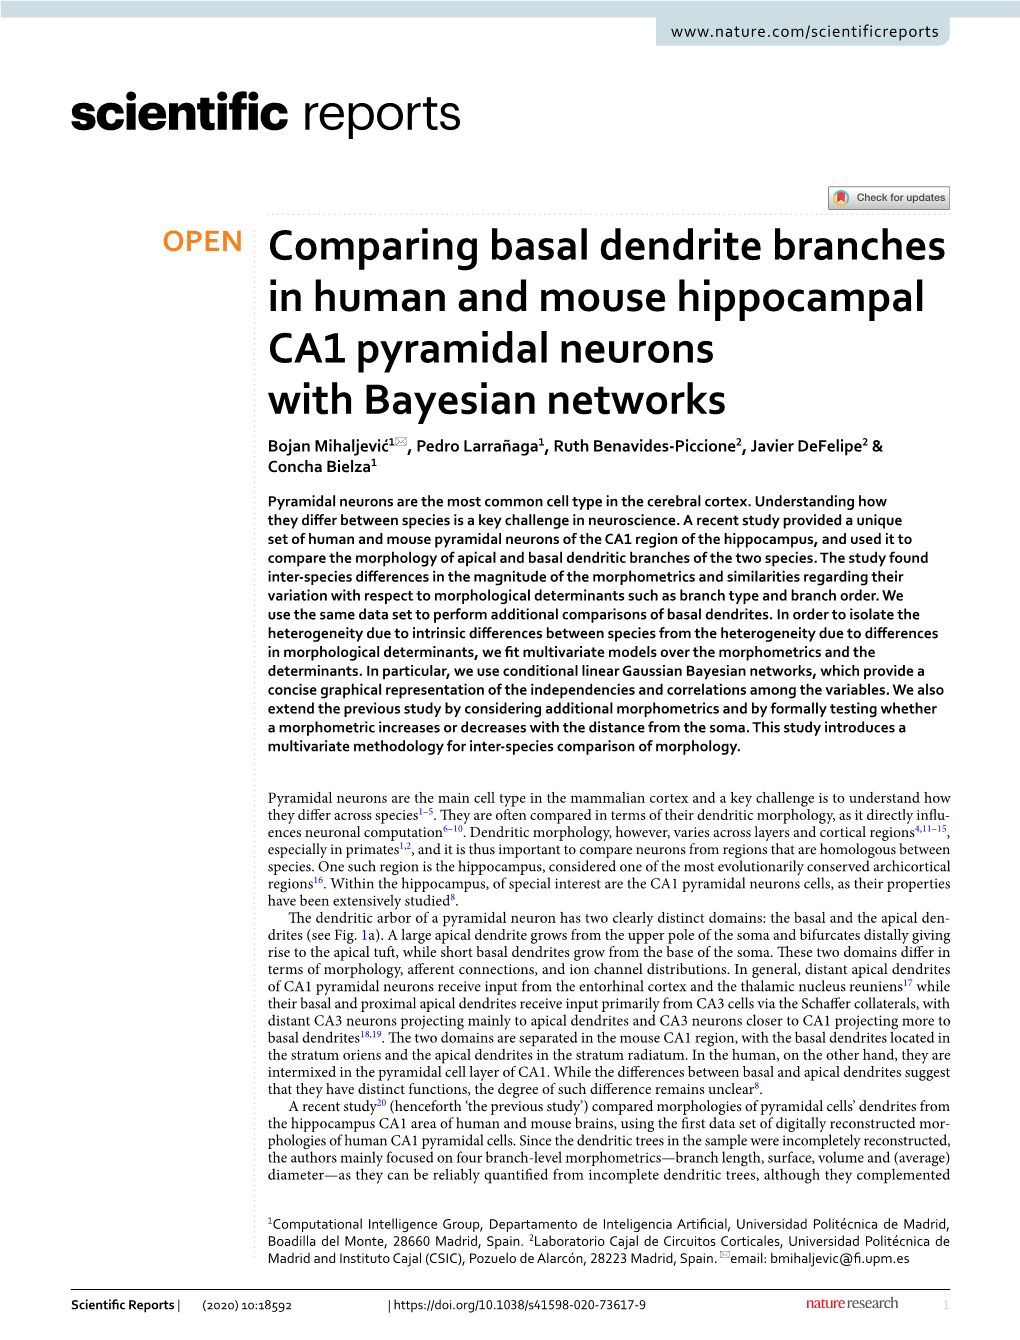 Comparing Basal Dendrite Branches in Human and Mouse Hippocampal